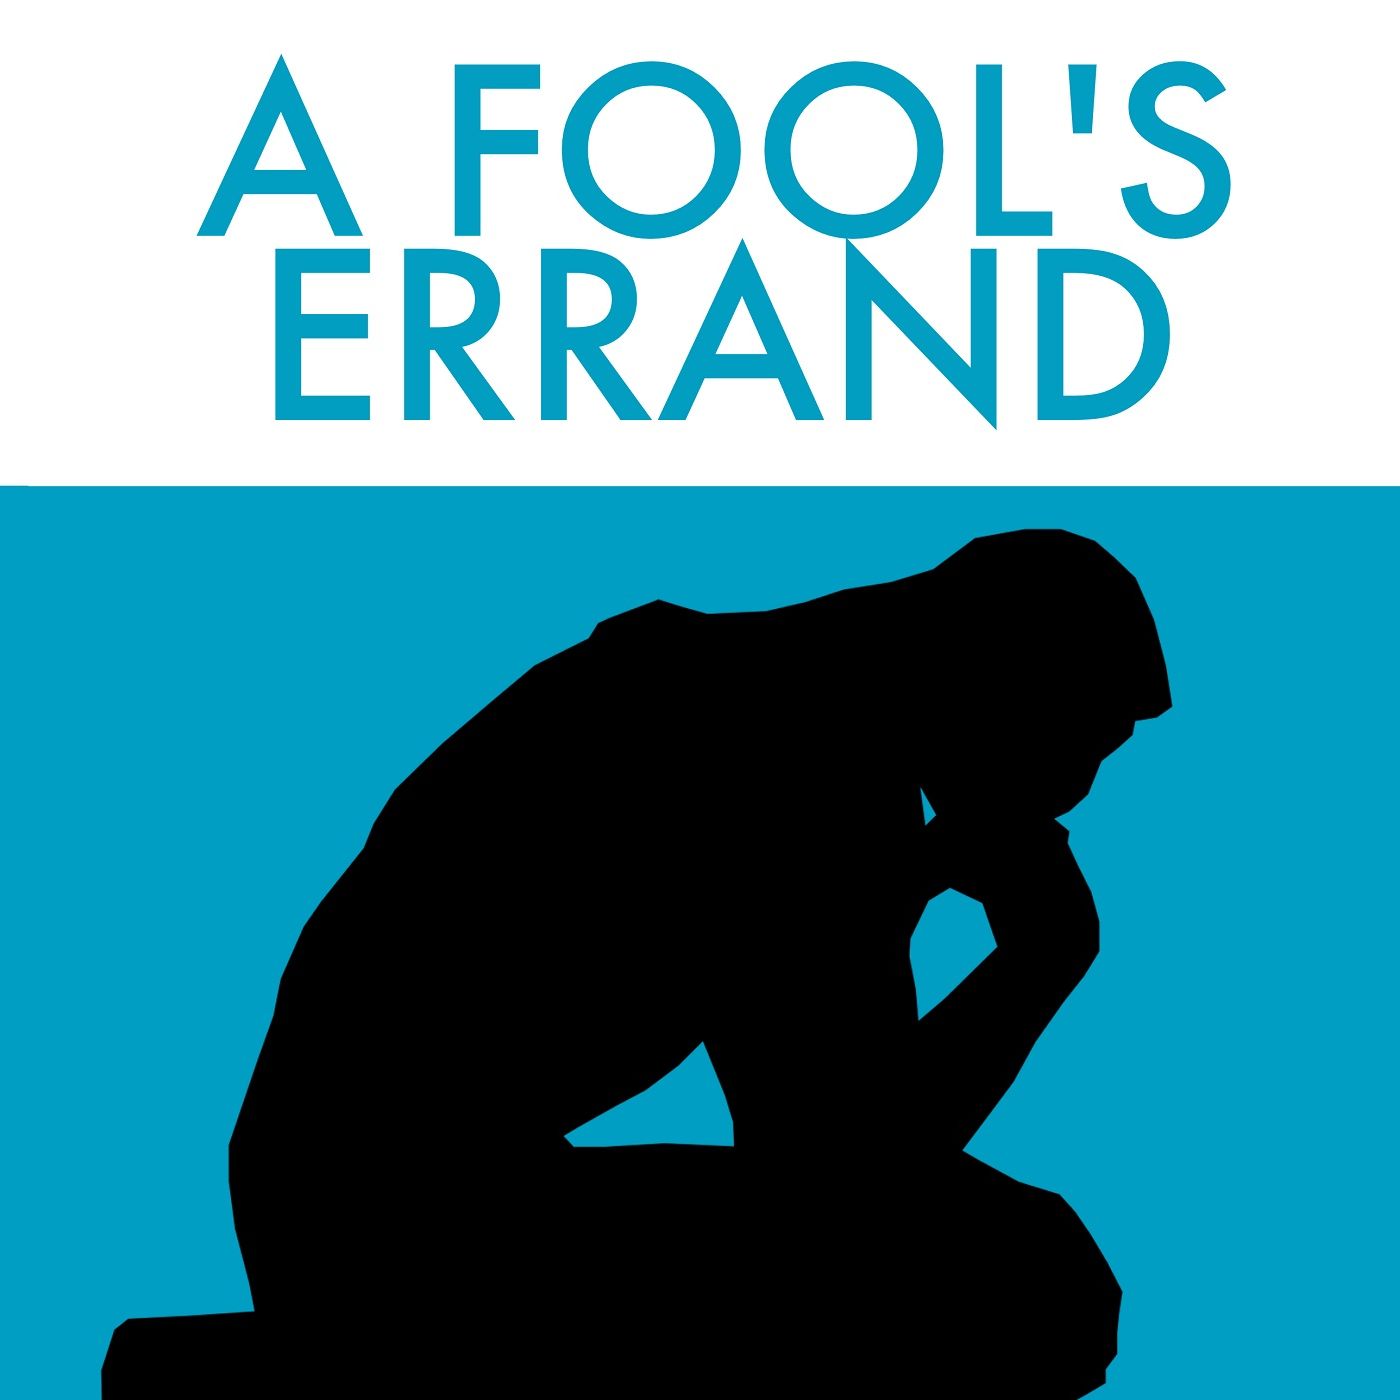 A Fool's Errand: Suggested Reading (January 19, 2010)